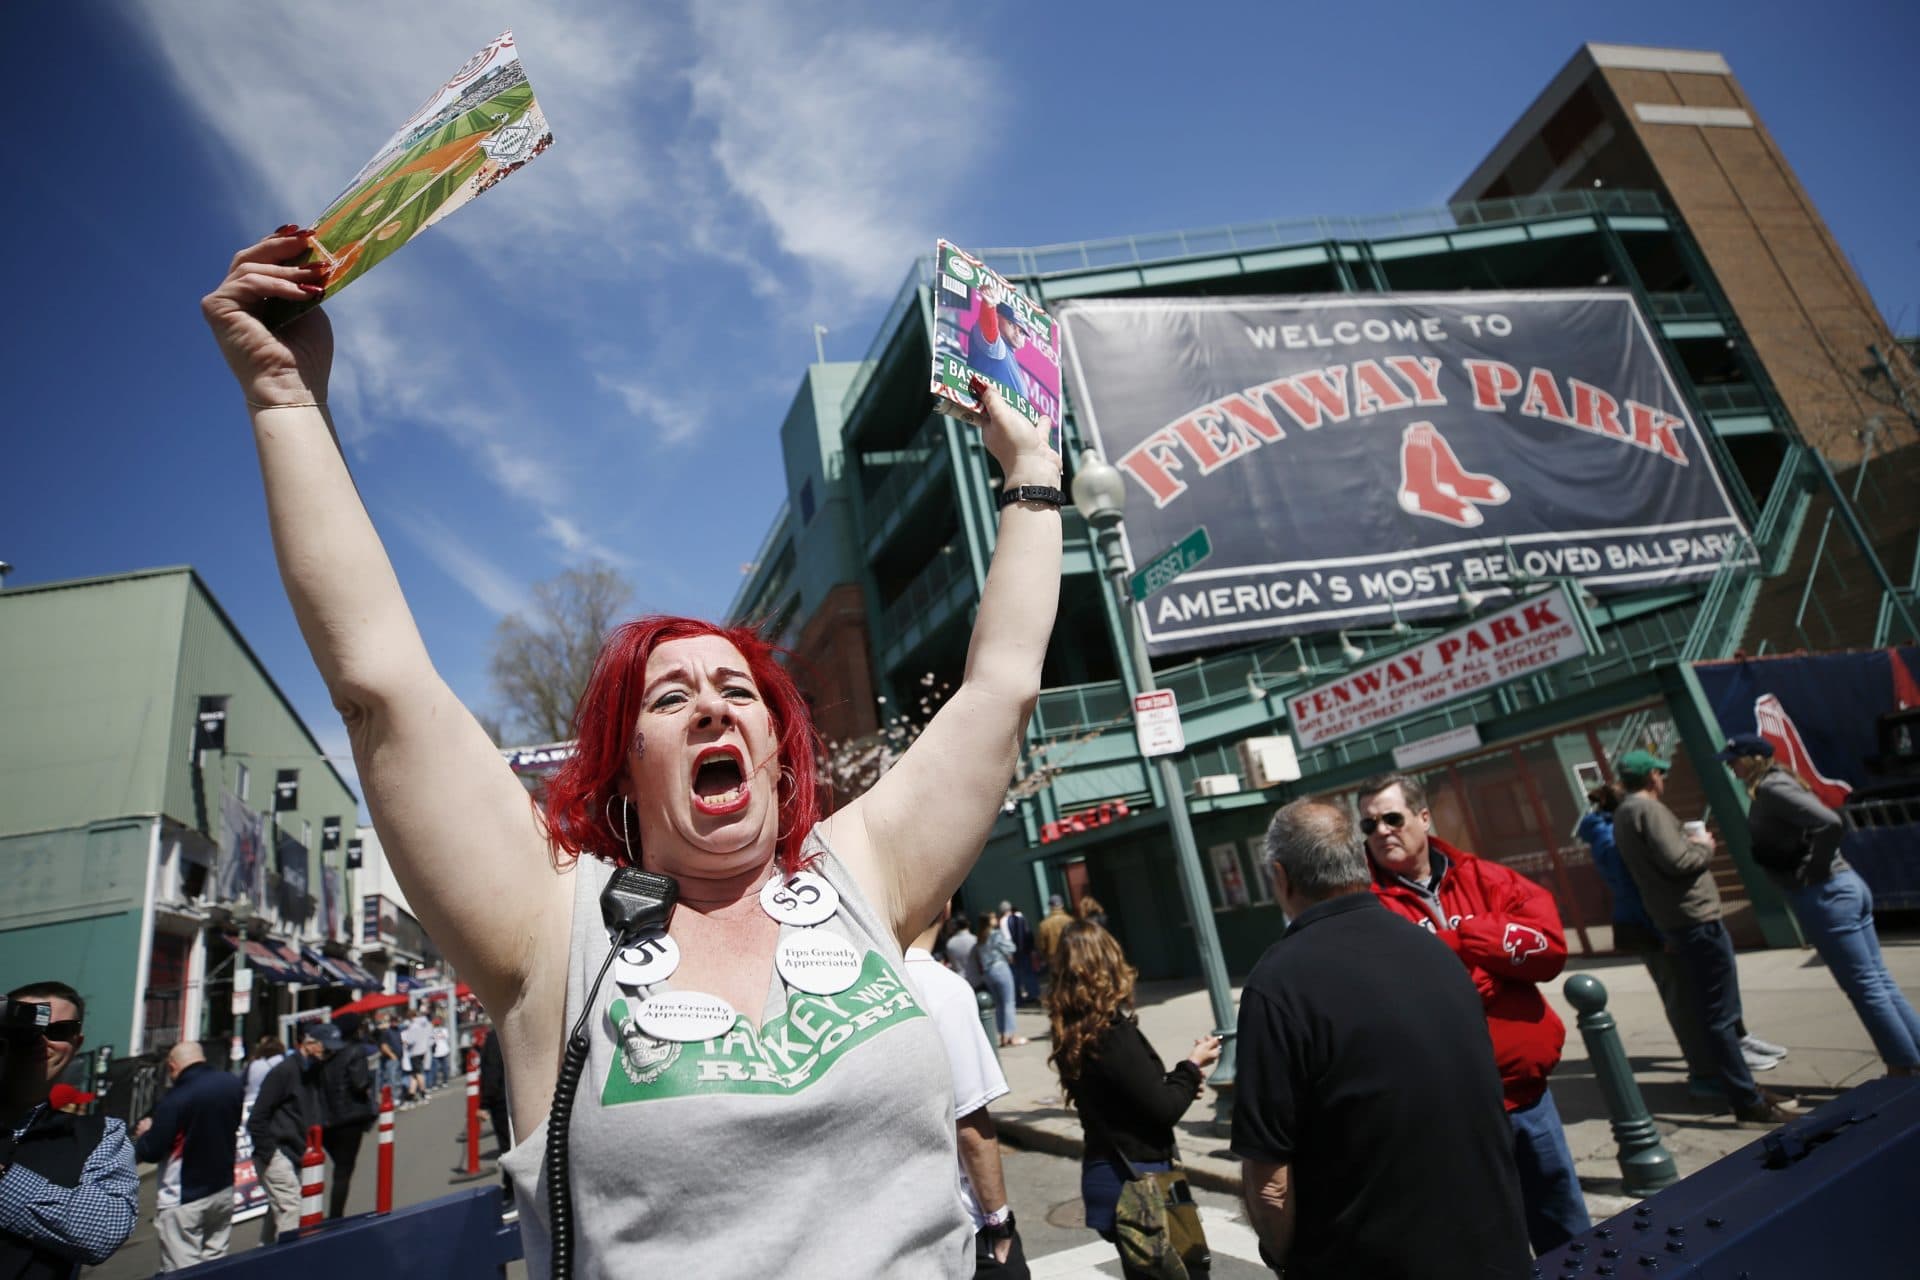 A woman sells programs outside Fenway Park opening day Friday. (Michael Dwyer/AP)